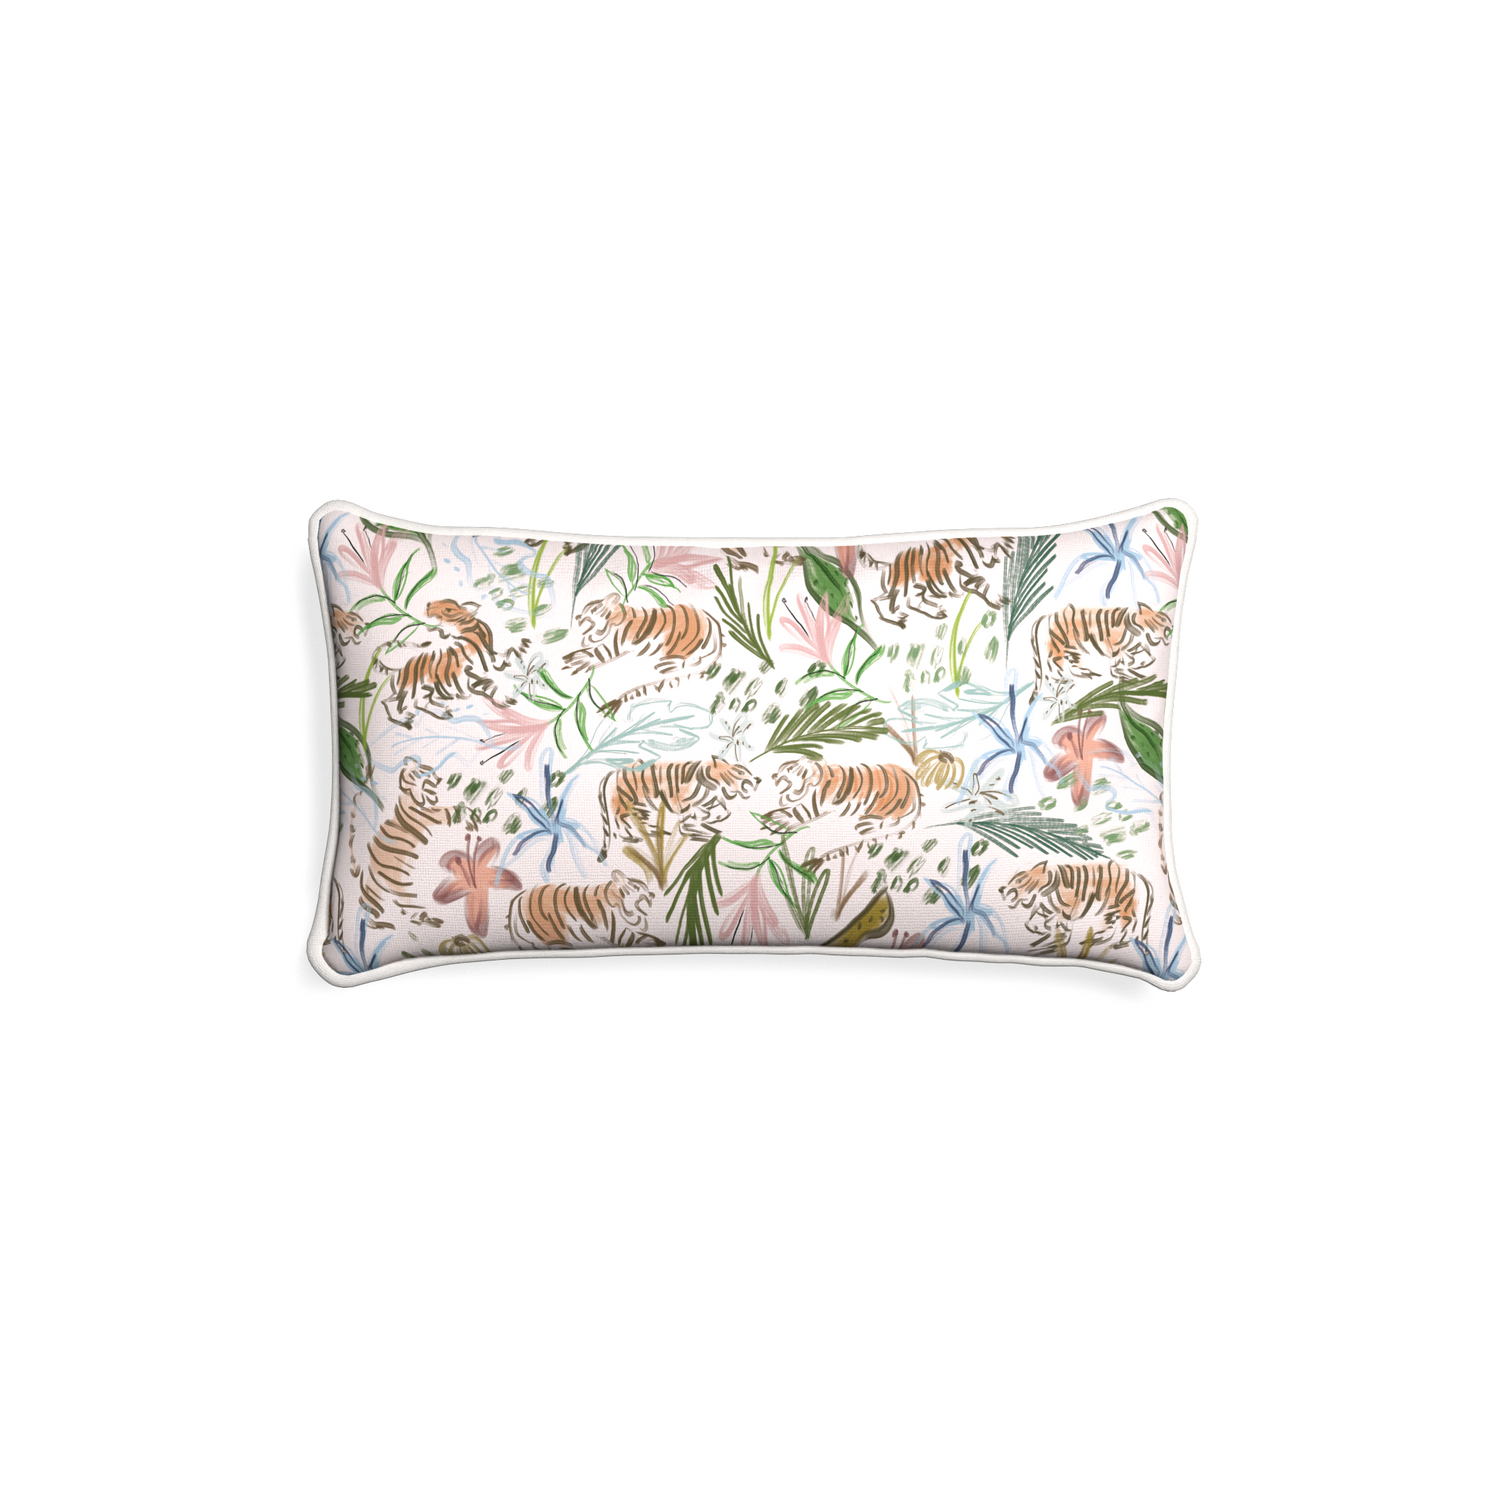 Petite-lumbar frida pink custom pink chinoiserie tigerpillow with snow piping on white background